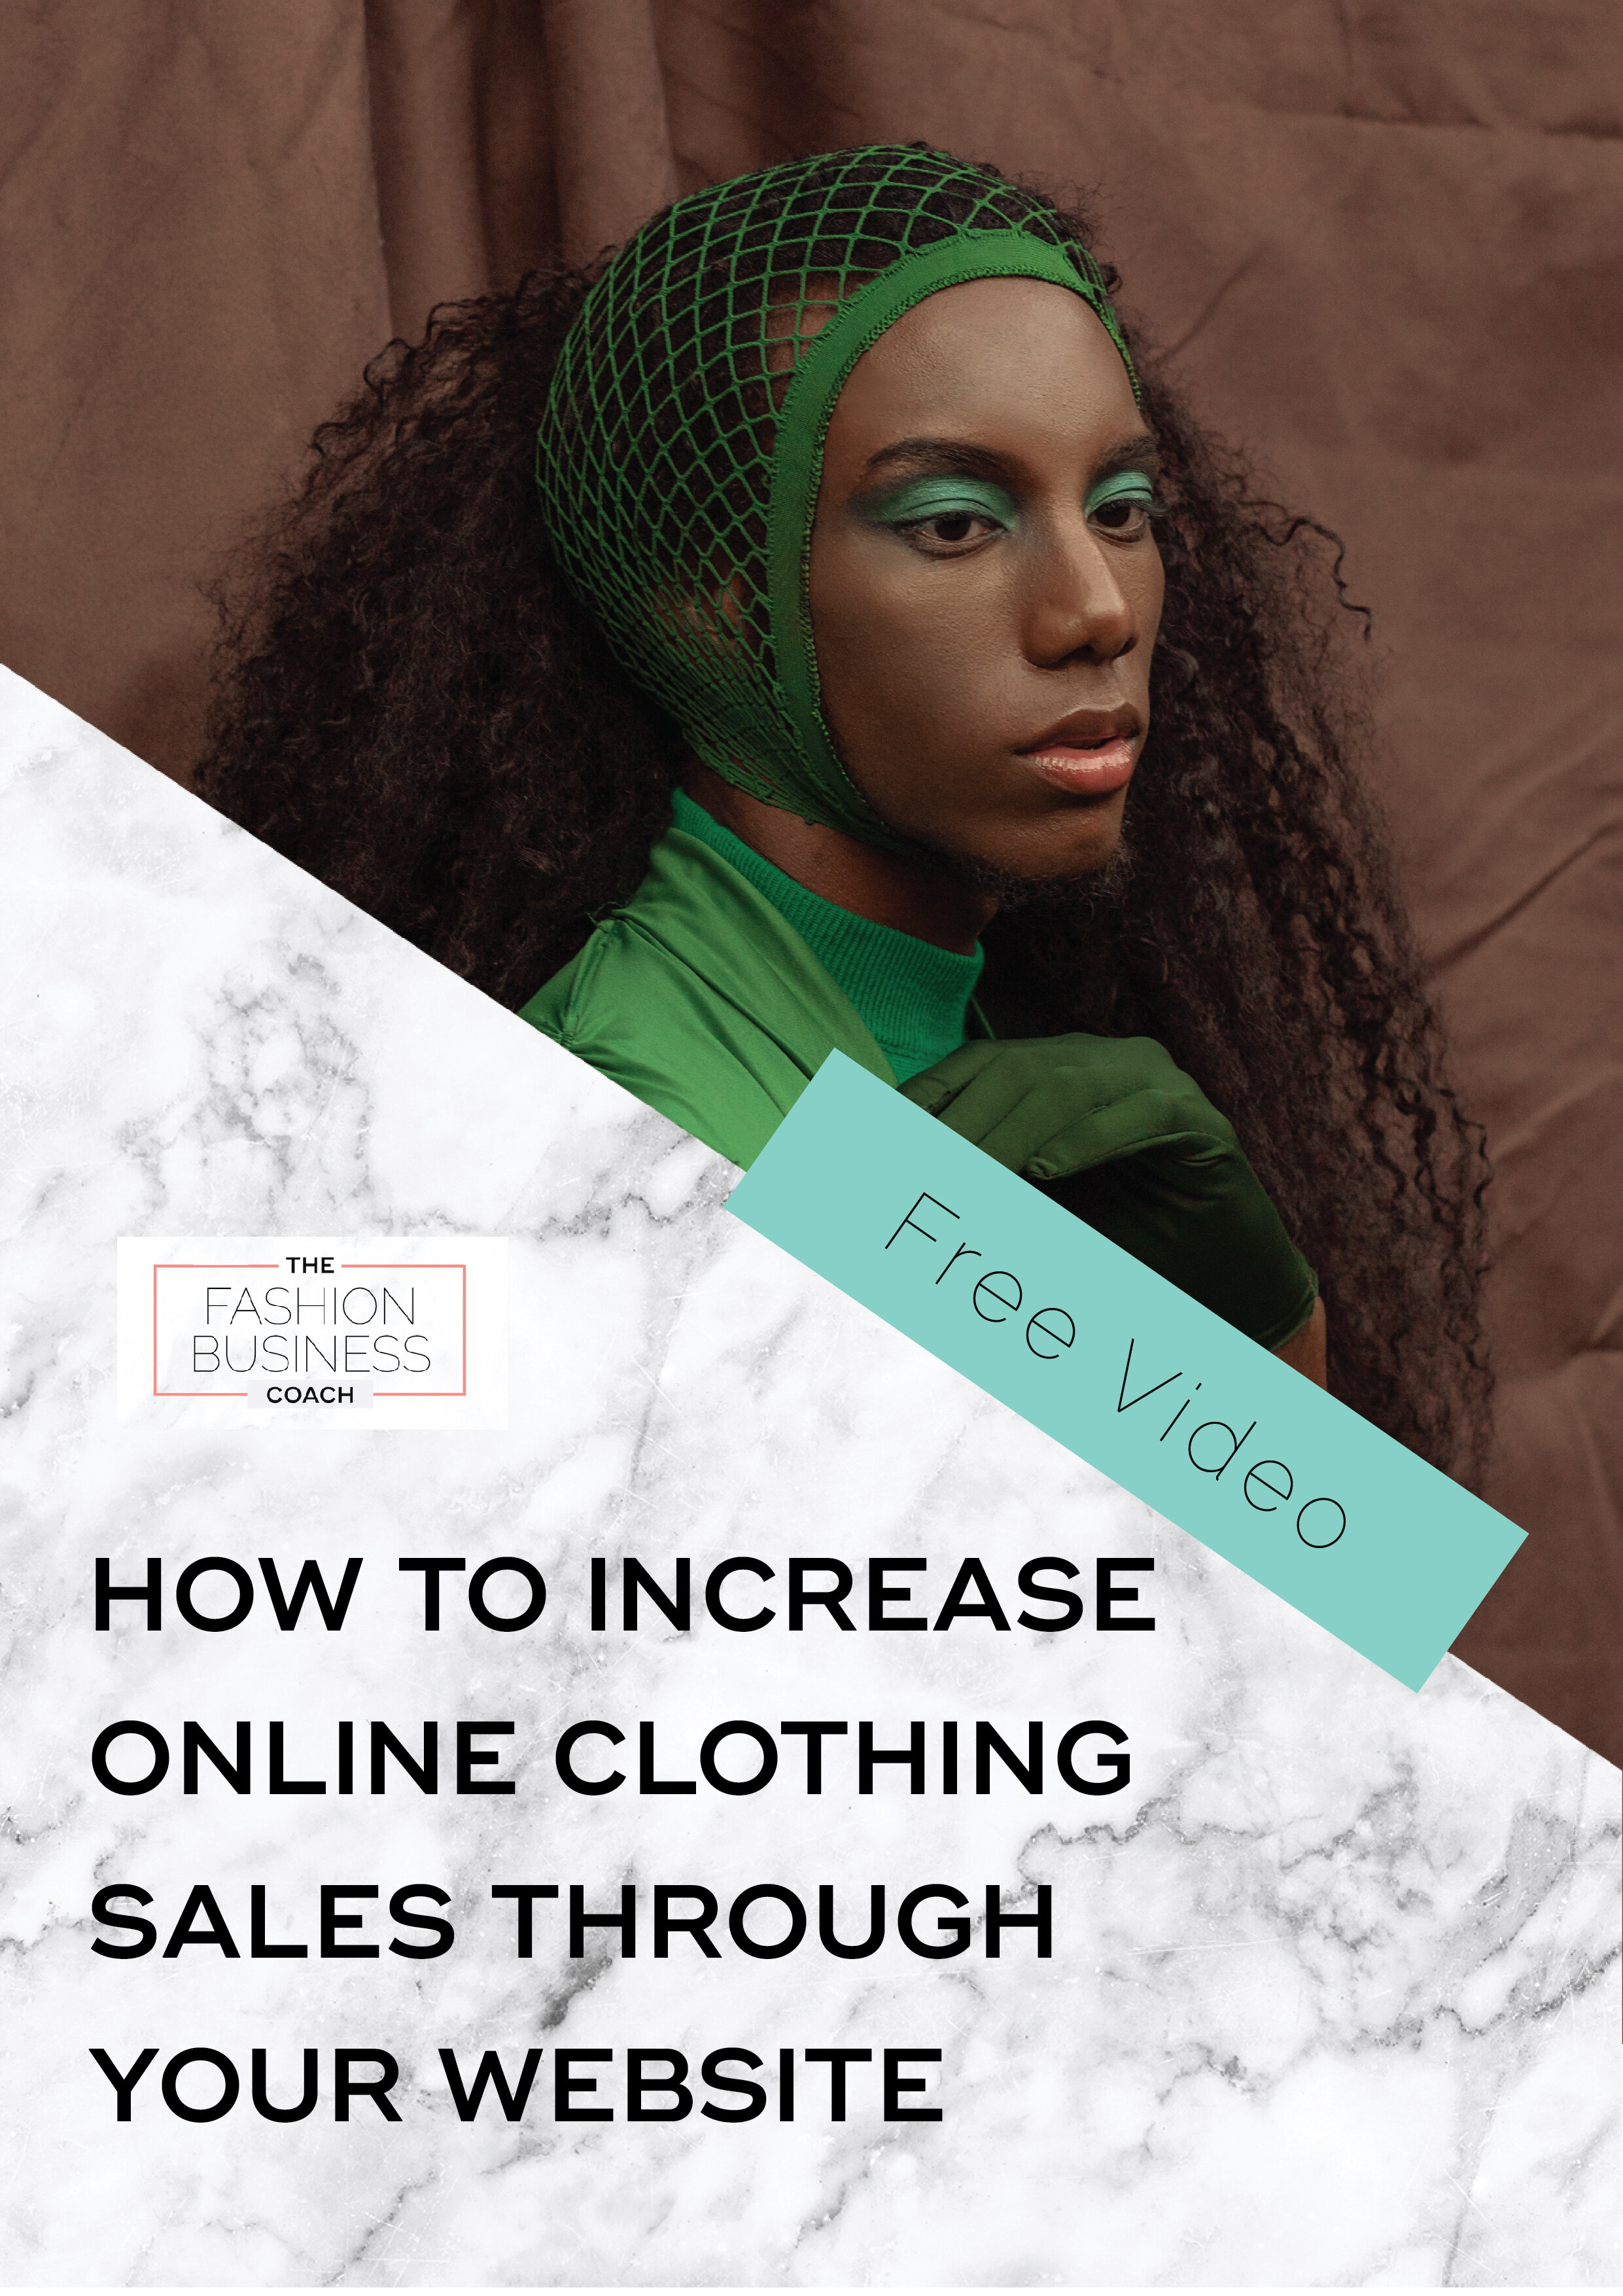 How to Increase Online Clothing Sales Through Your Website1.jpg